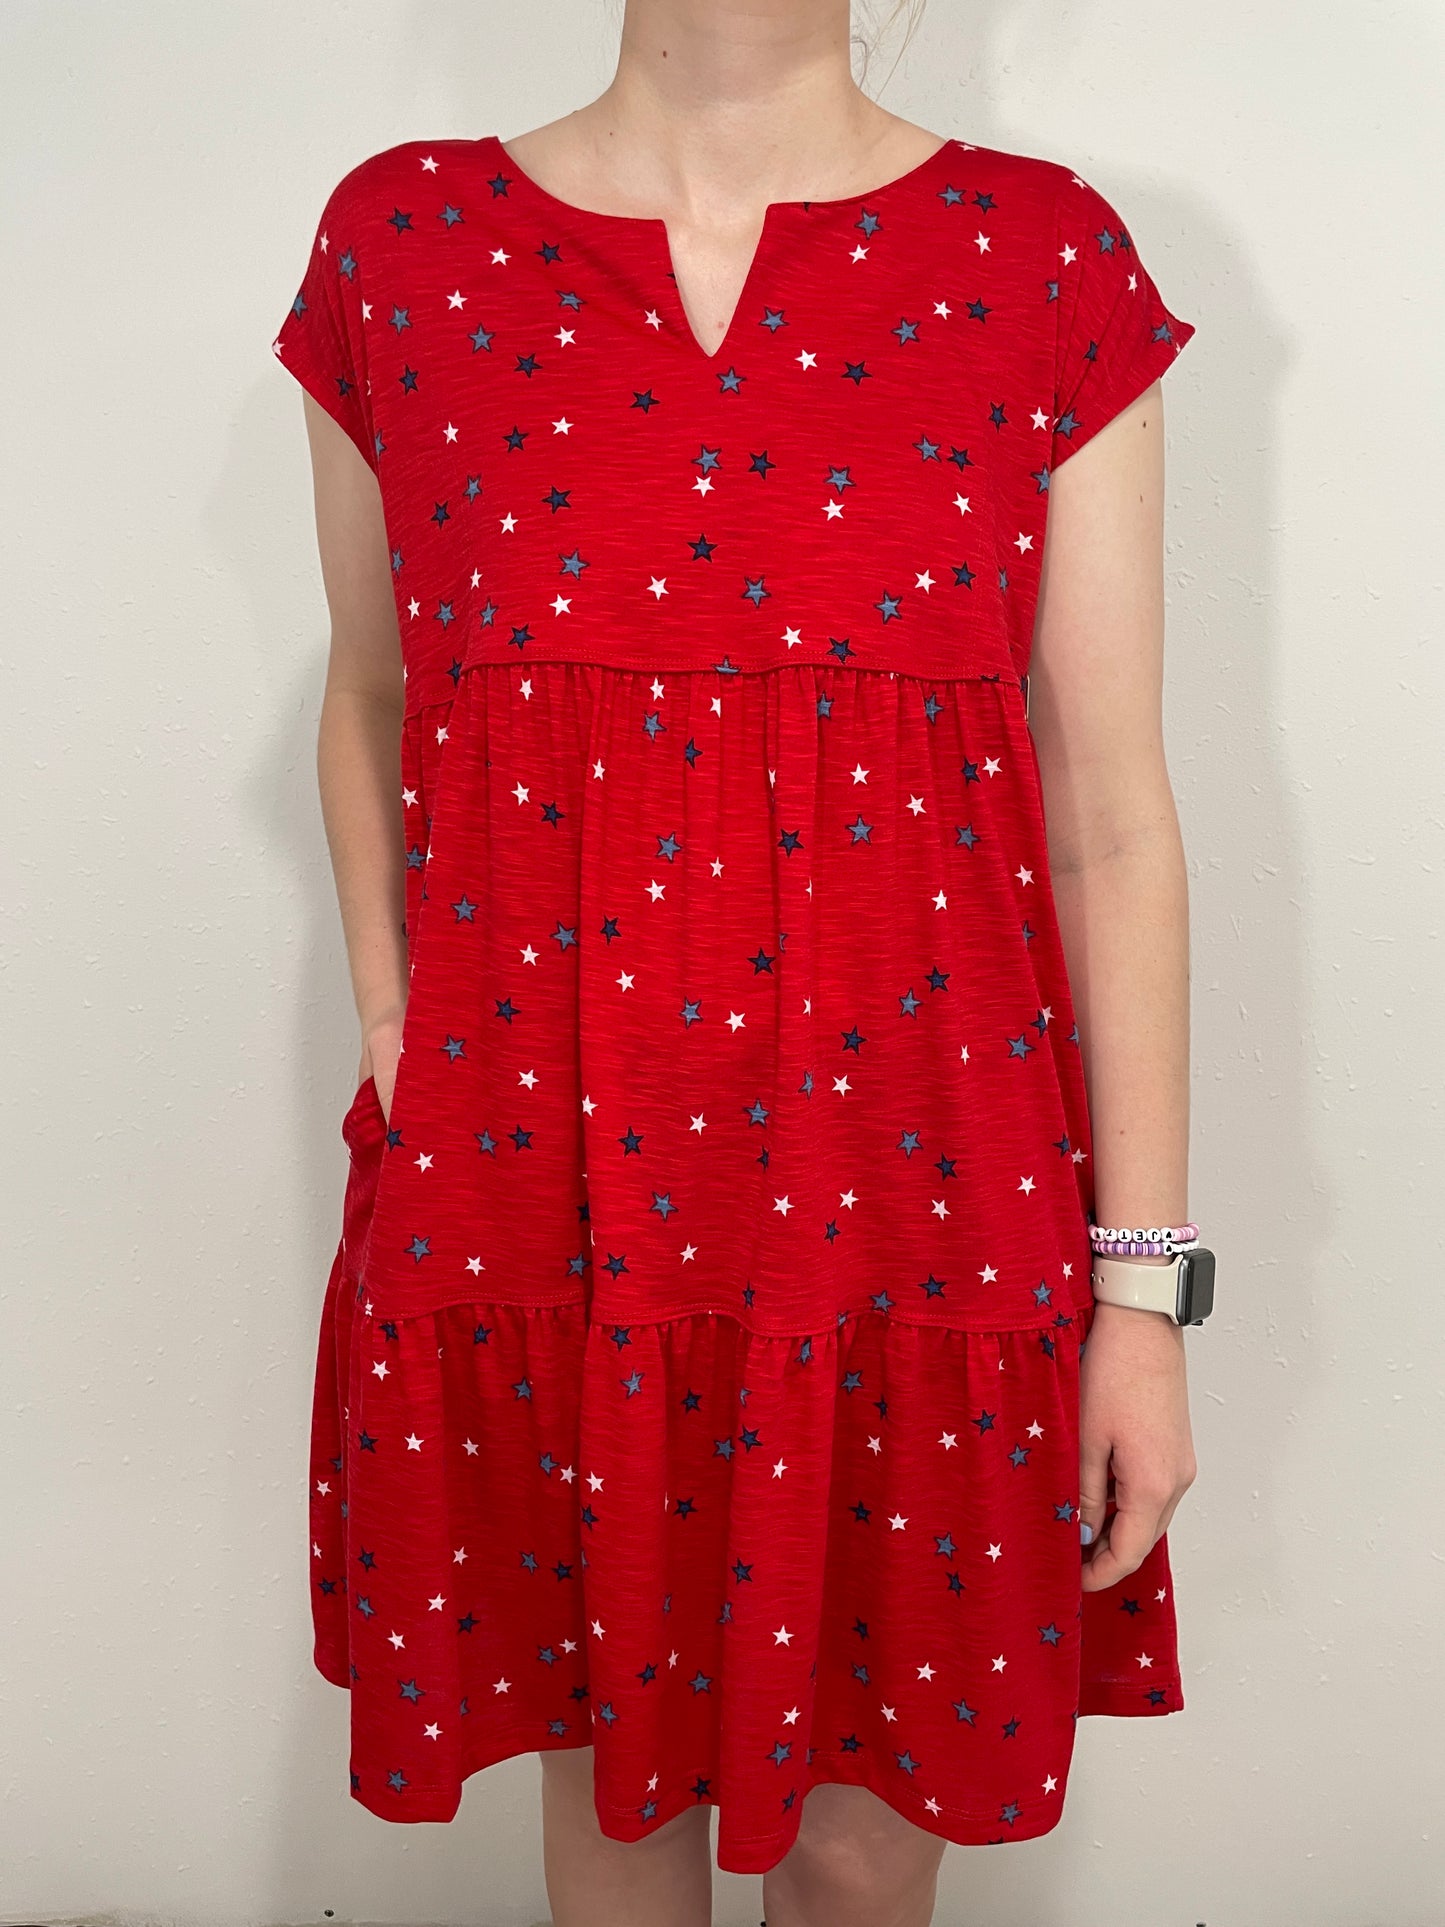 OH MY STARS TIERED DRESS - RED/WHITE/BLUE